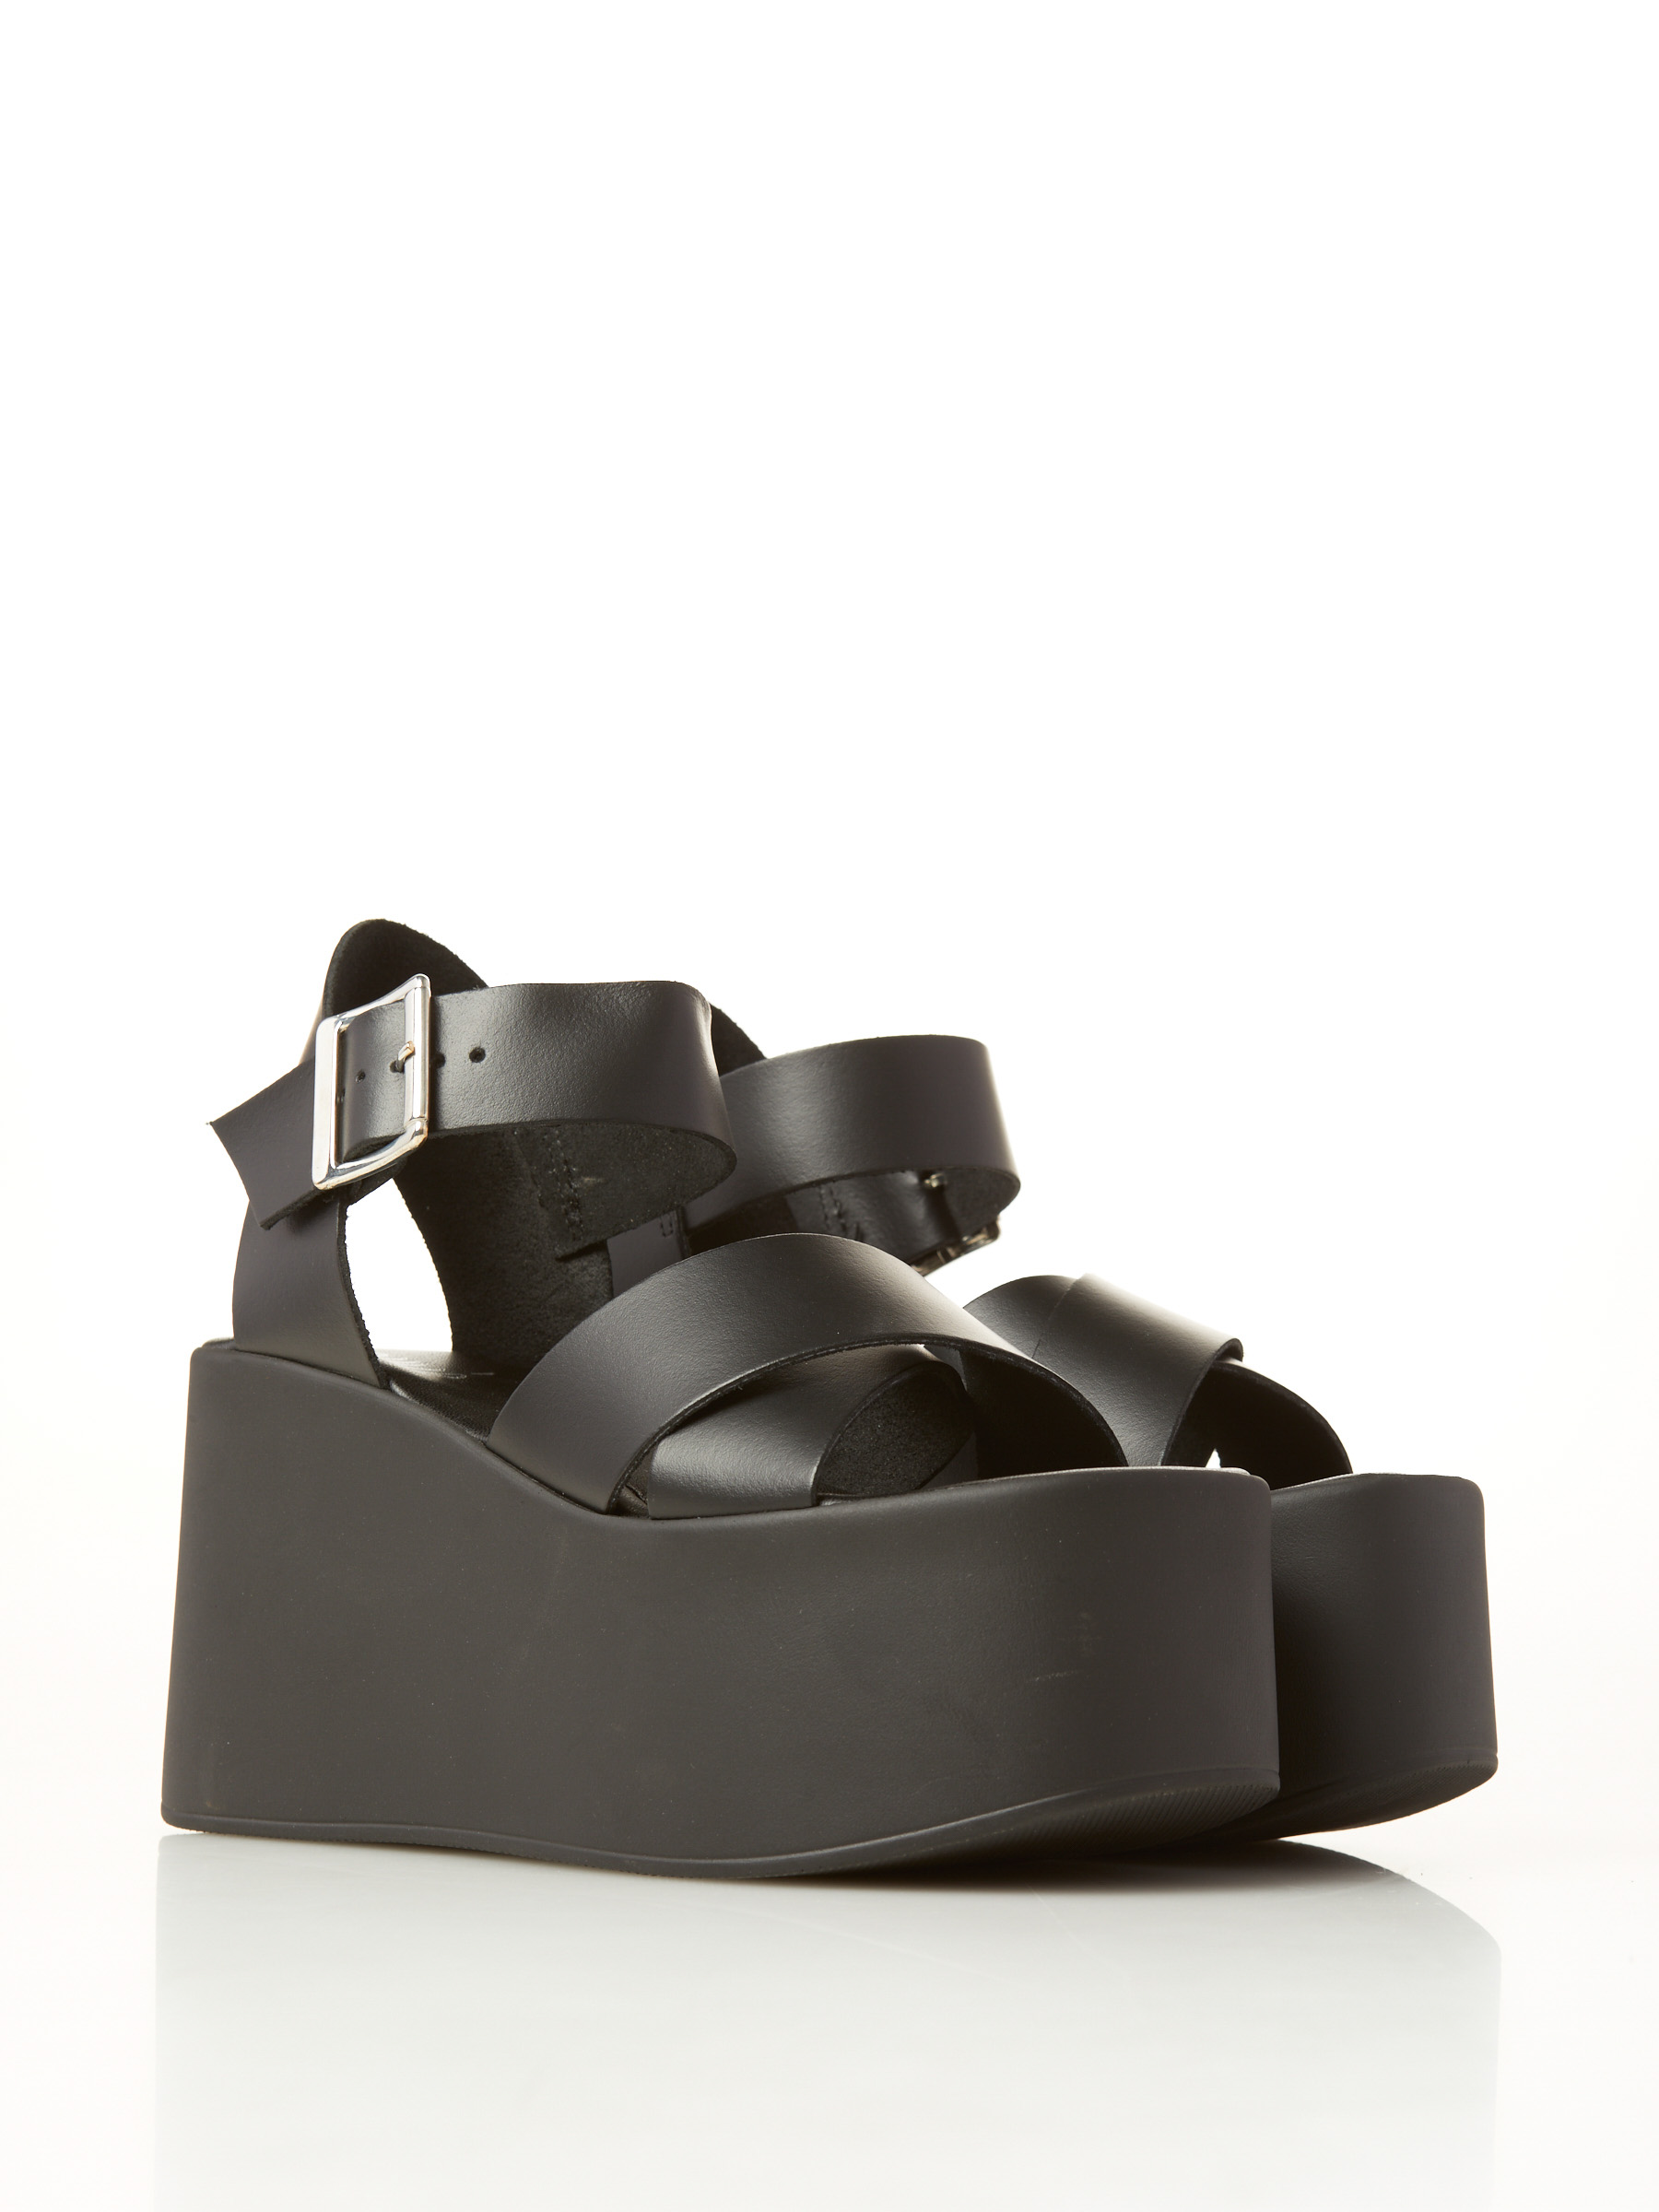 leather sandal with wedge